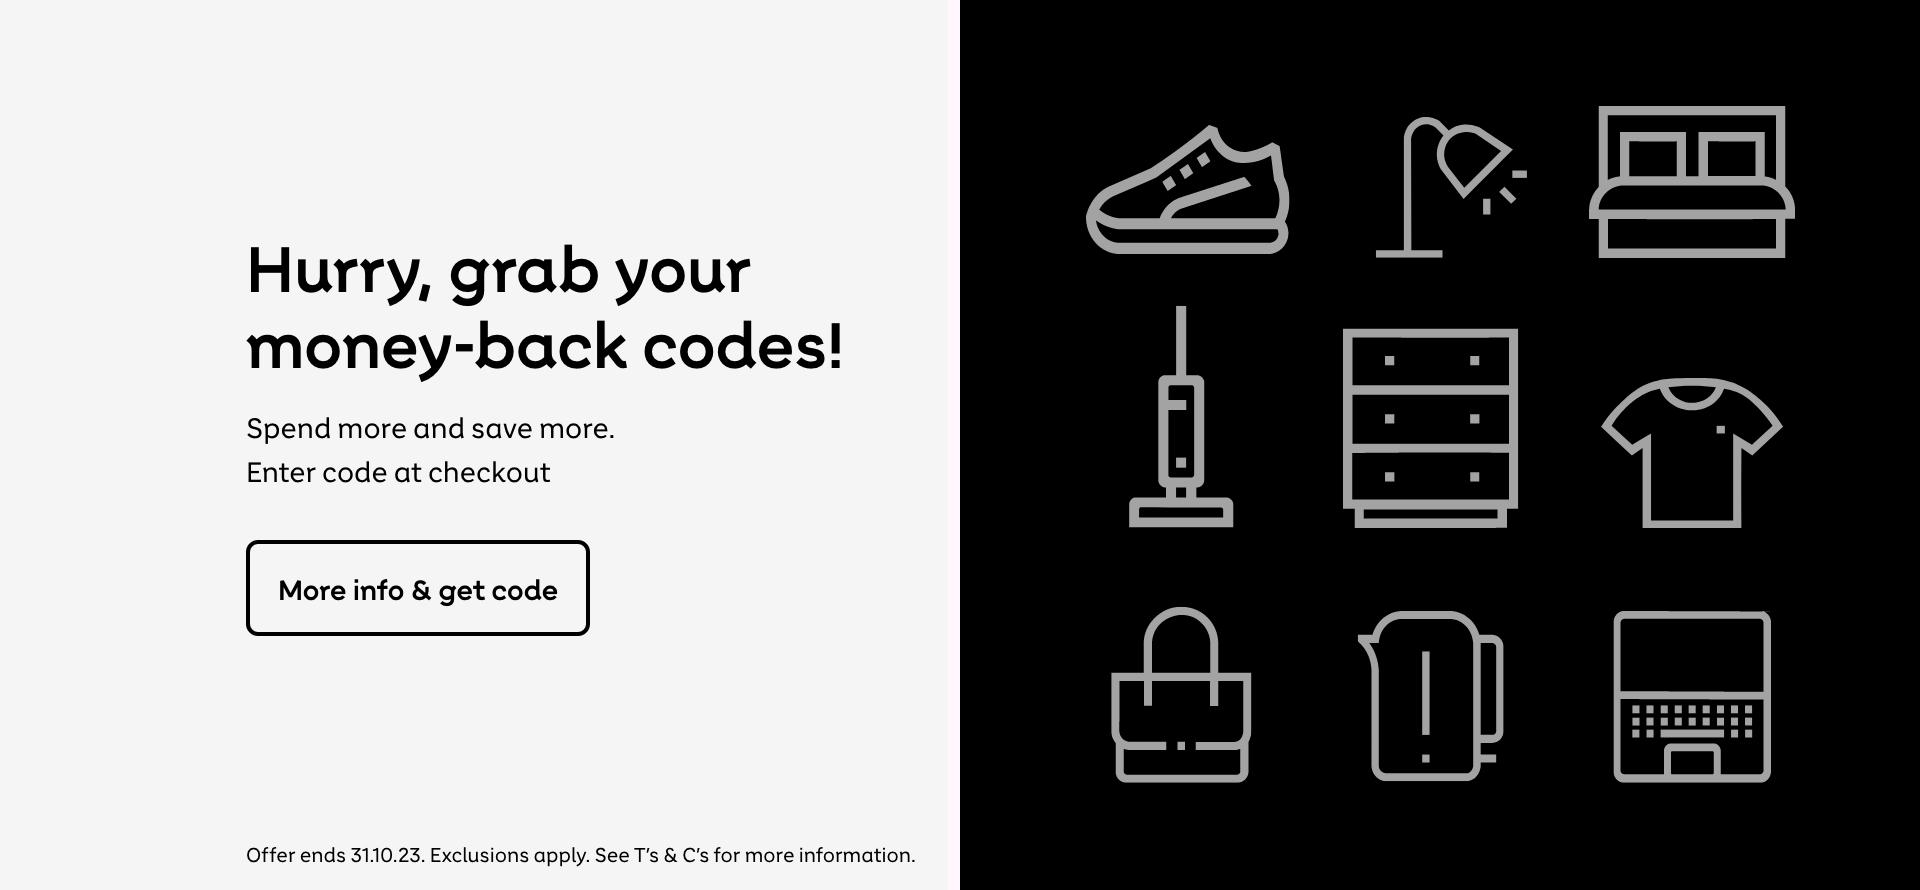 Hurry, grab your money-back codes! Spend more and save more. Enter code at checkout. More info & get code. Offer ends 31.10.23. Exclusions apply. See T&Cs for more information.